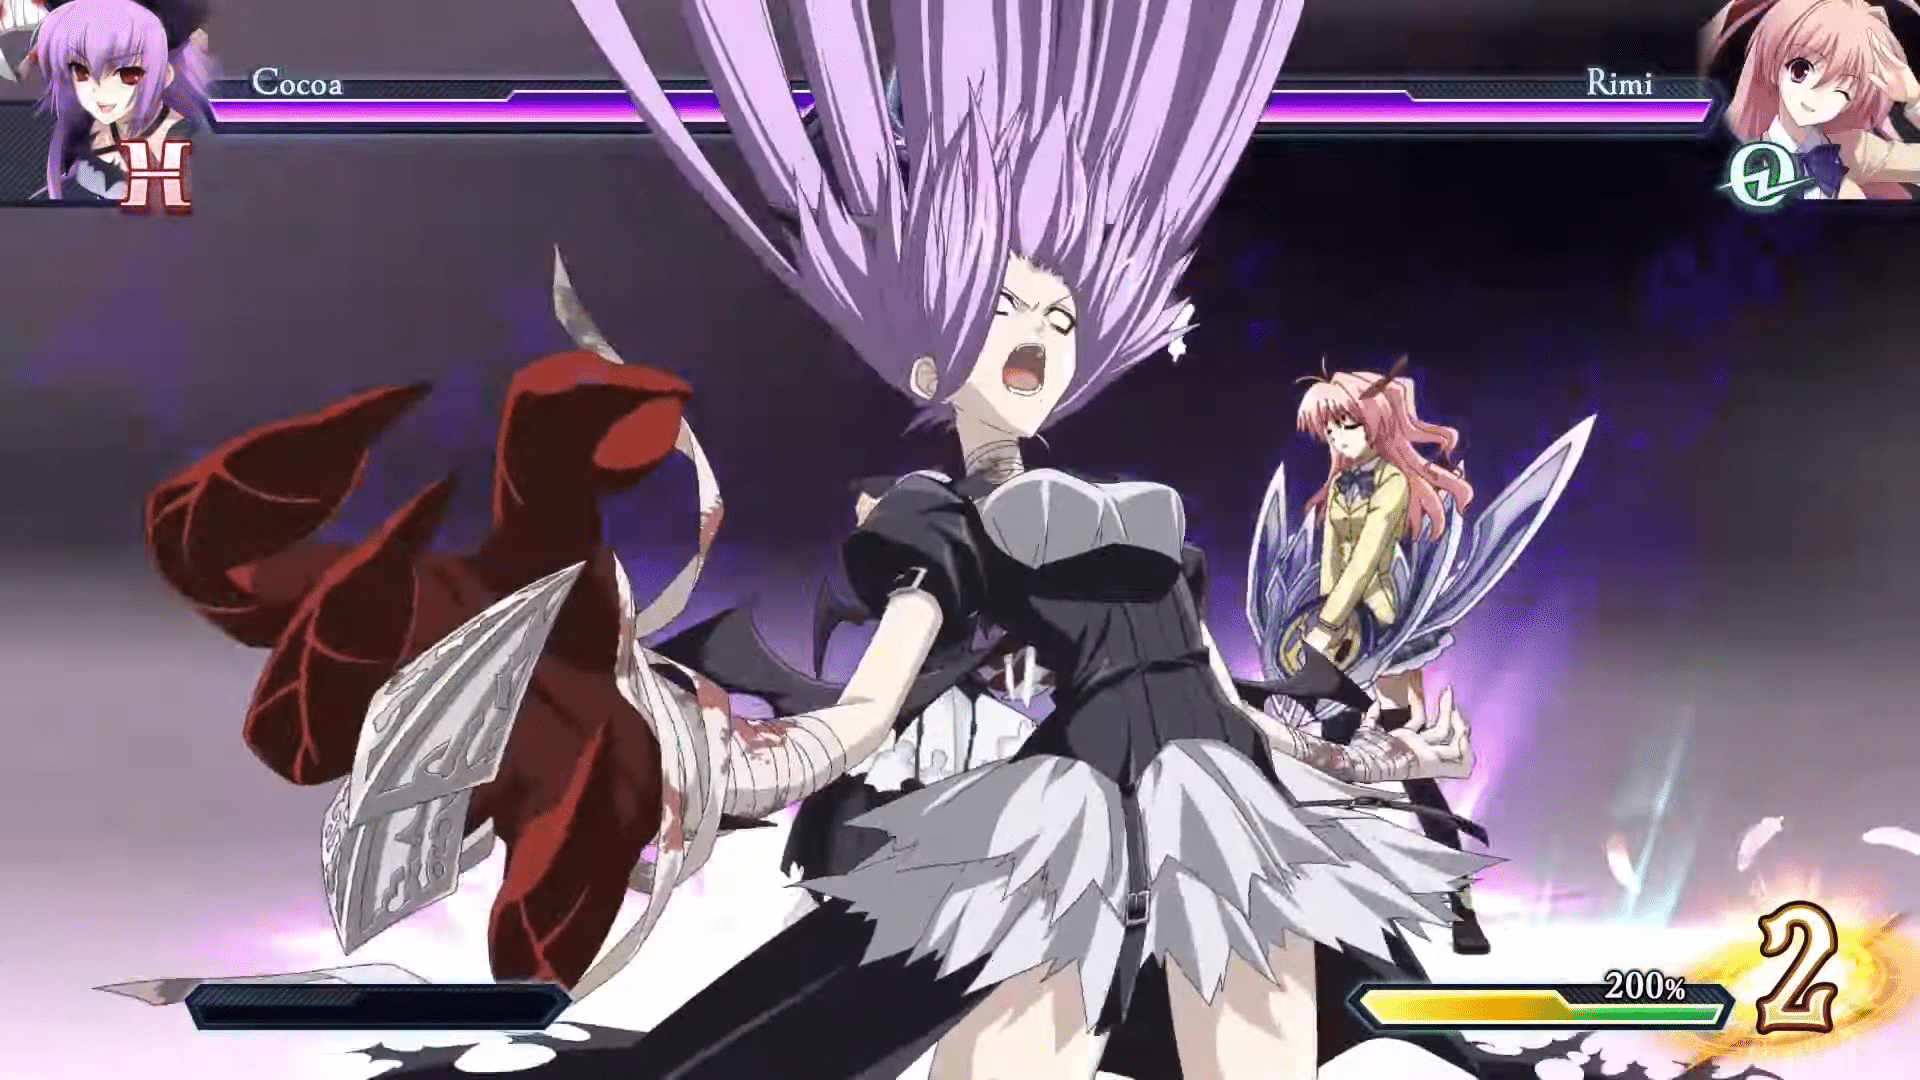 Phantom Breaker: Omnia Shares New Trailer Highlighting The Claw-Wielding Cosplayer, Cocoa